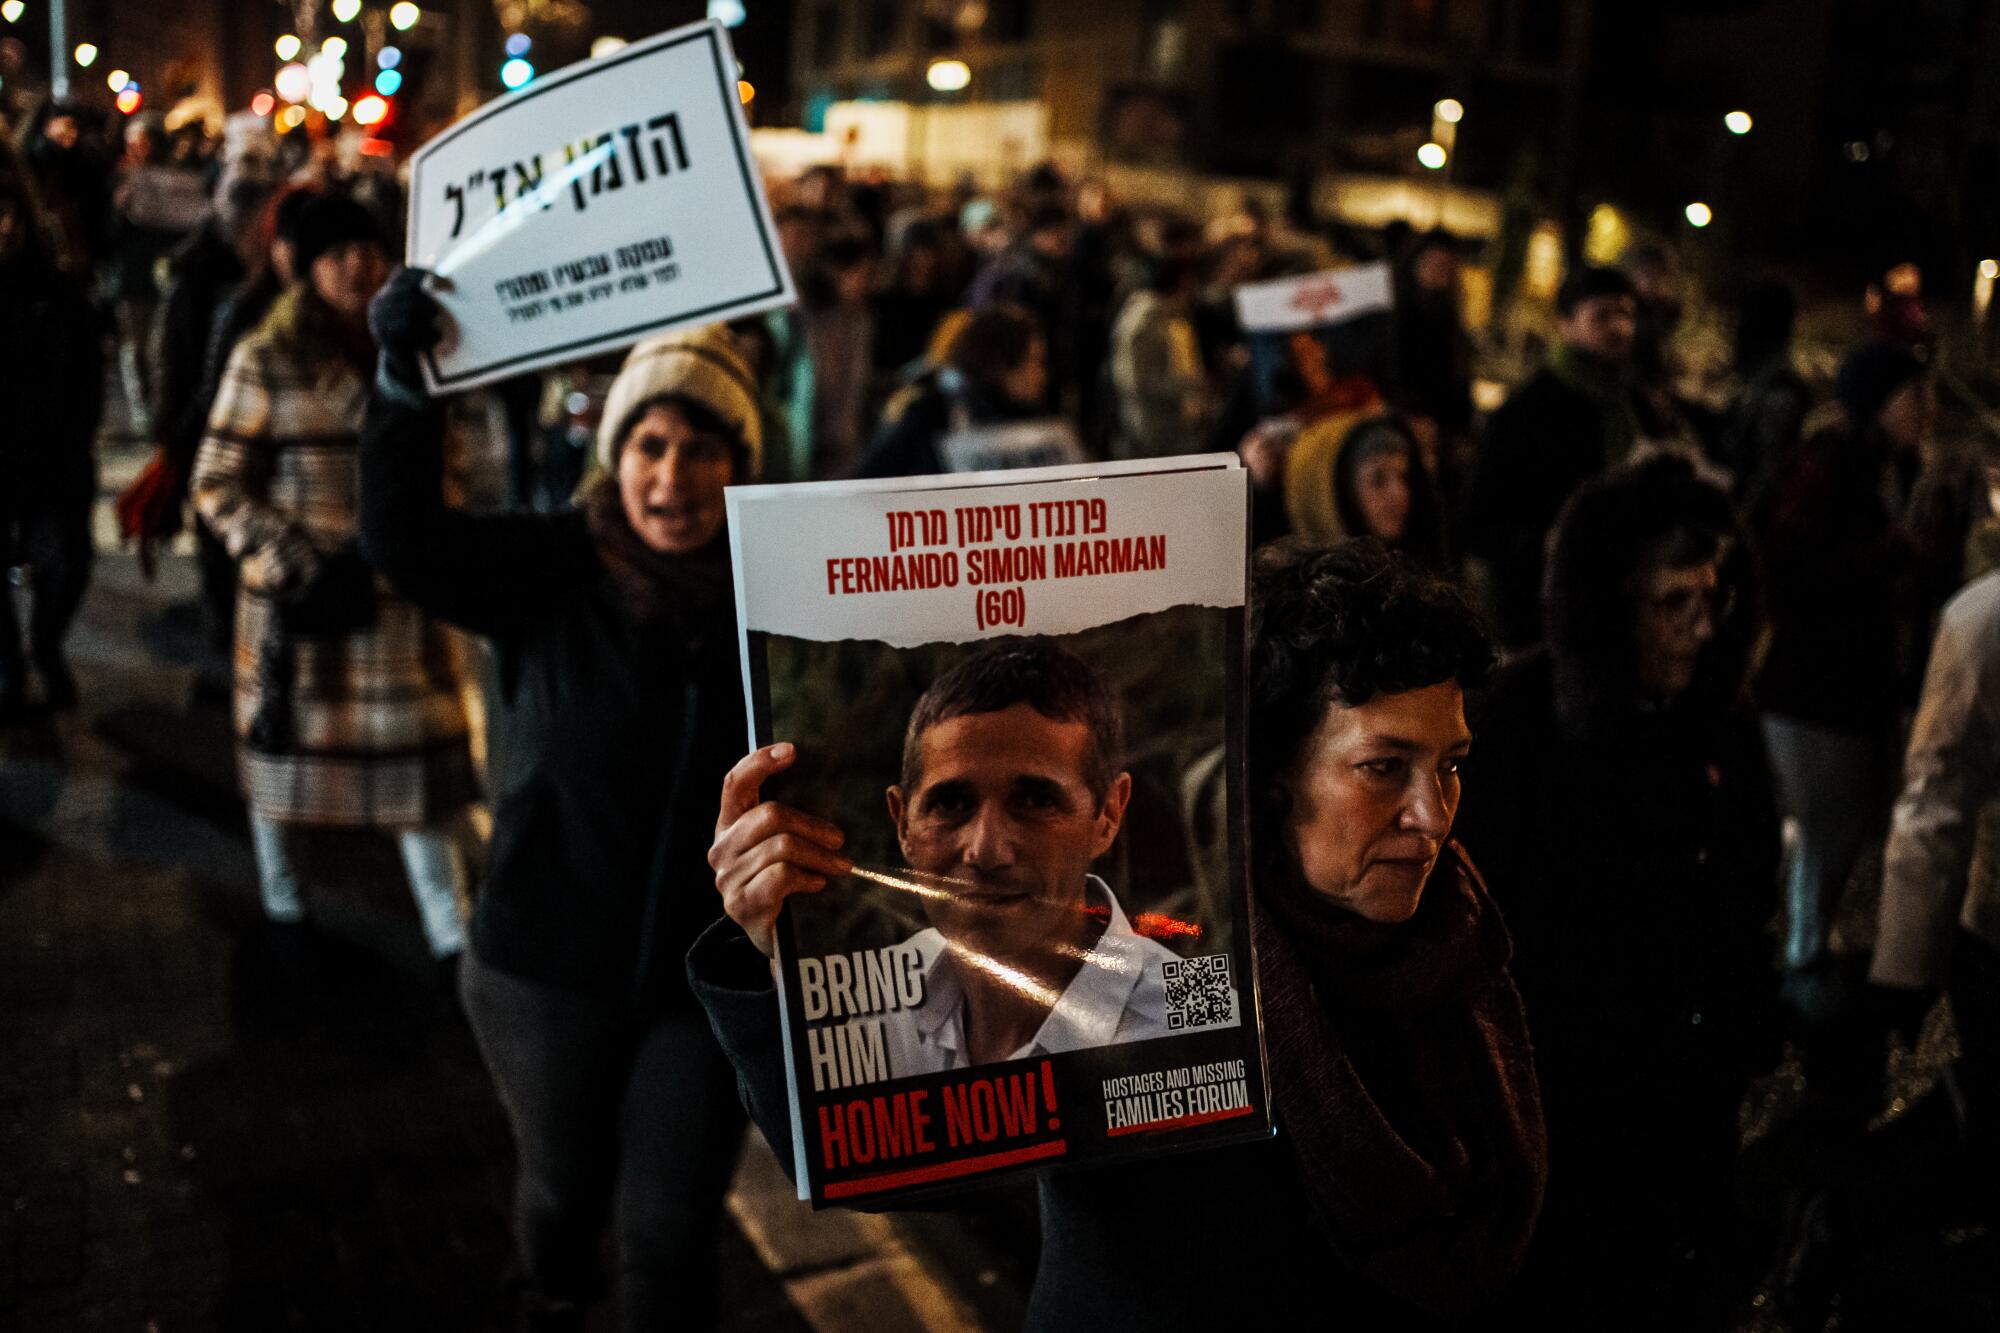 Protesters hold signs calling for hostages in Gaza during a march.